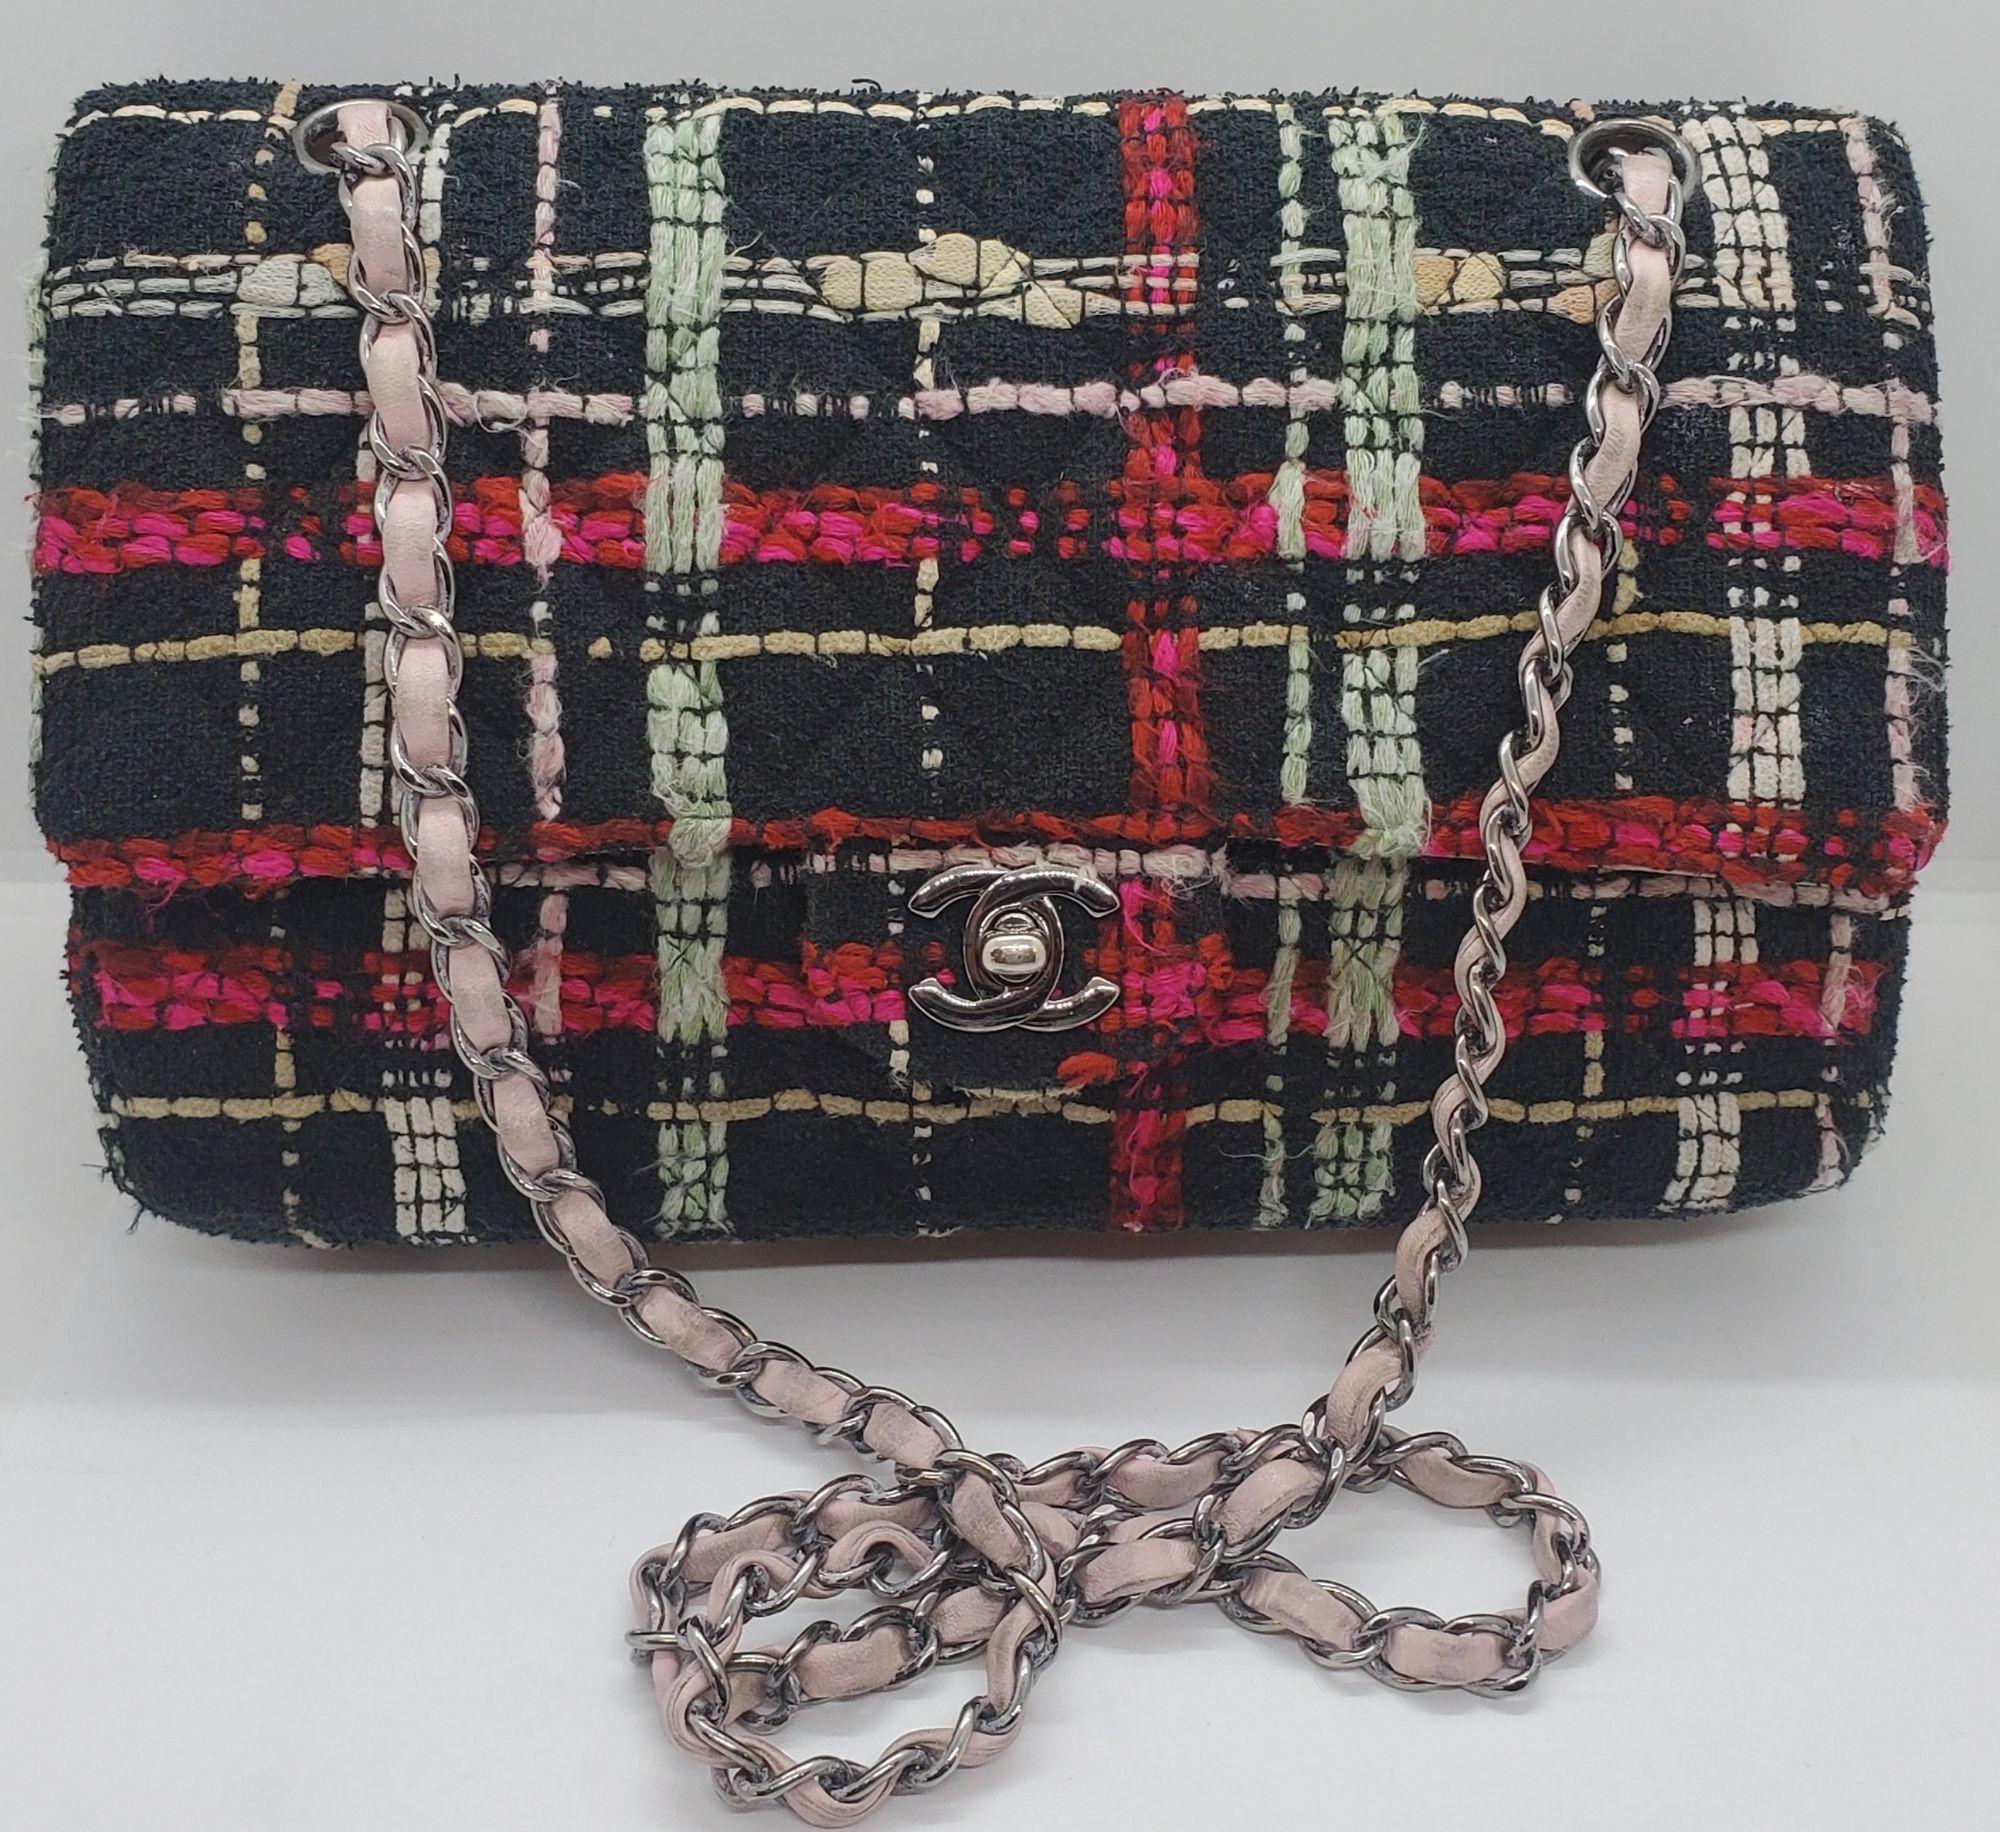 Auth Classic Chanel Runway Tweed Flap Bag In Good Condition For Sale In Pasadena, CA